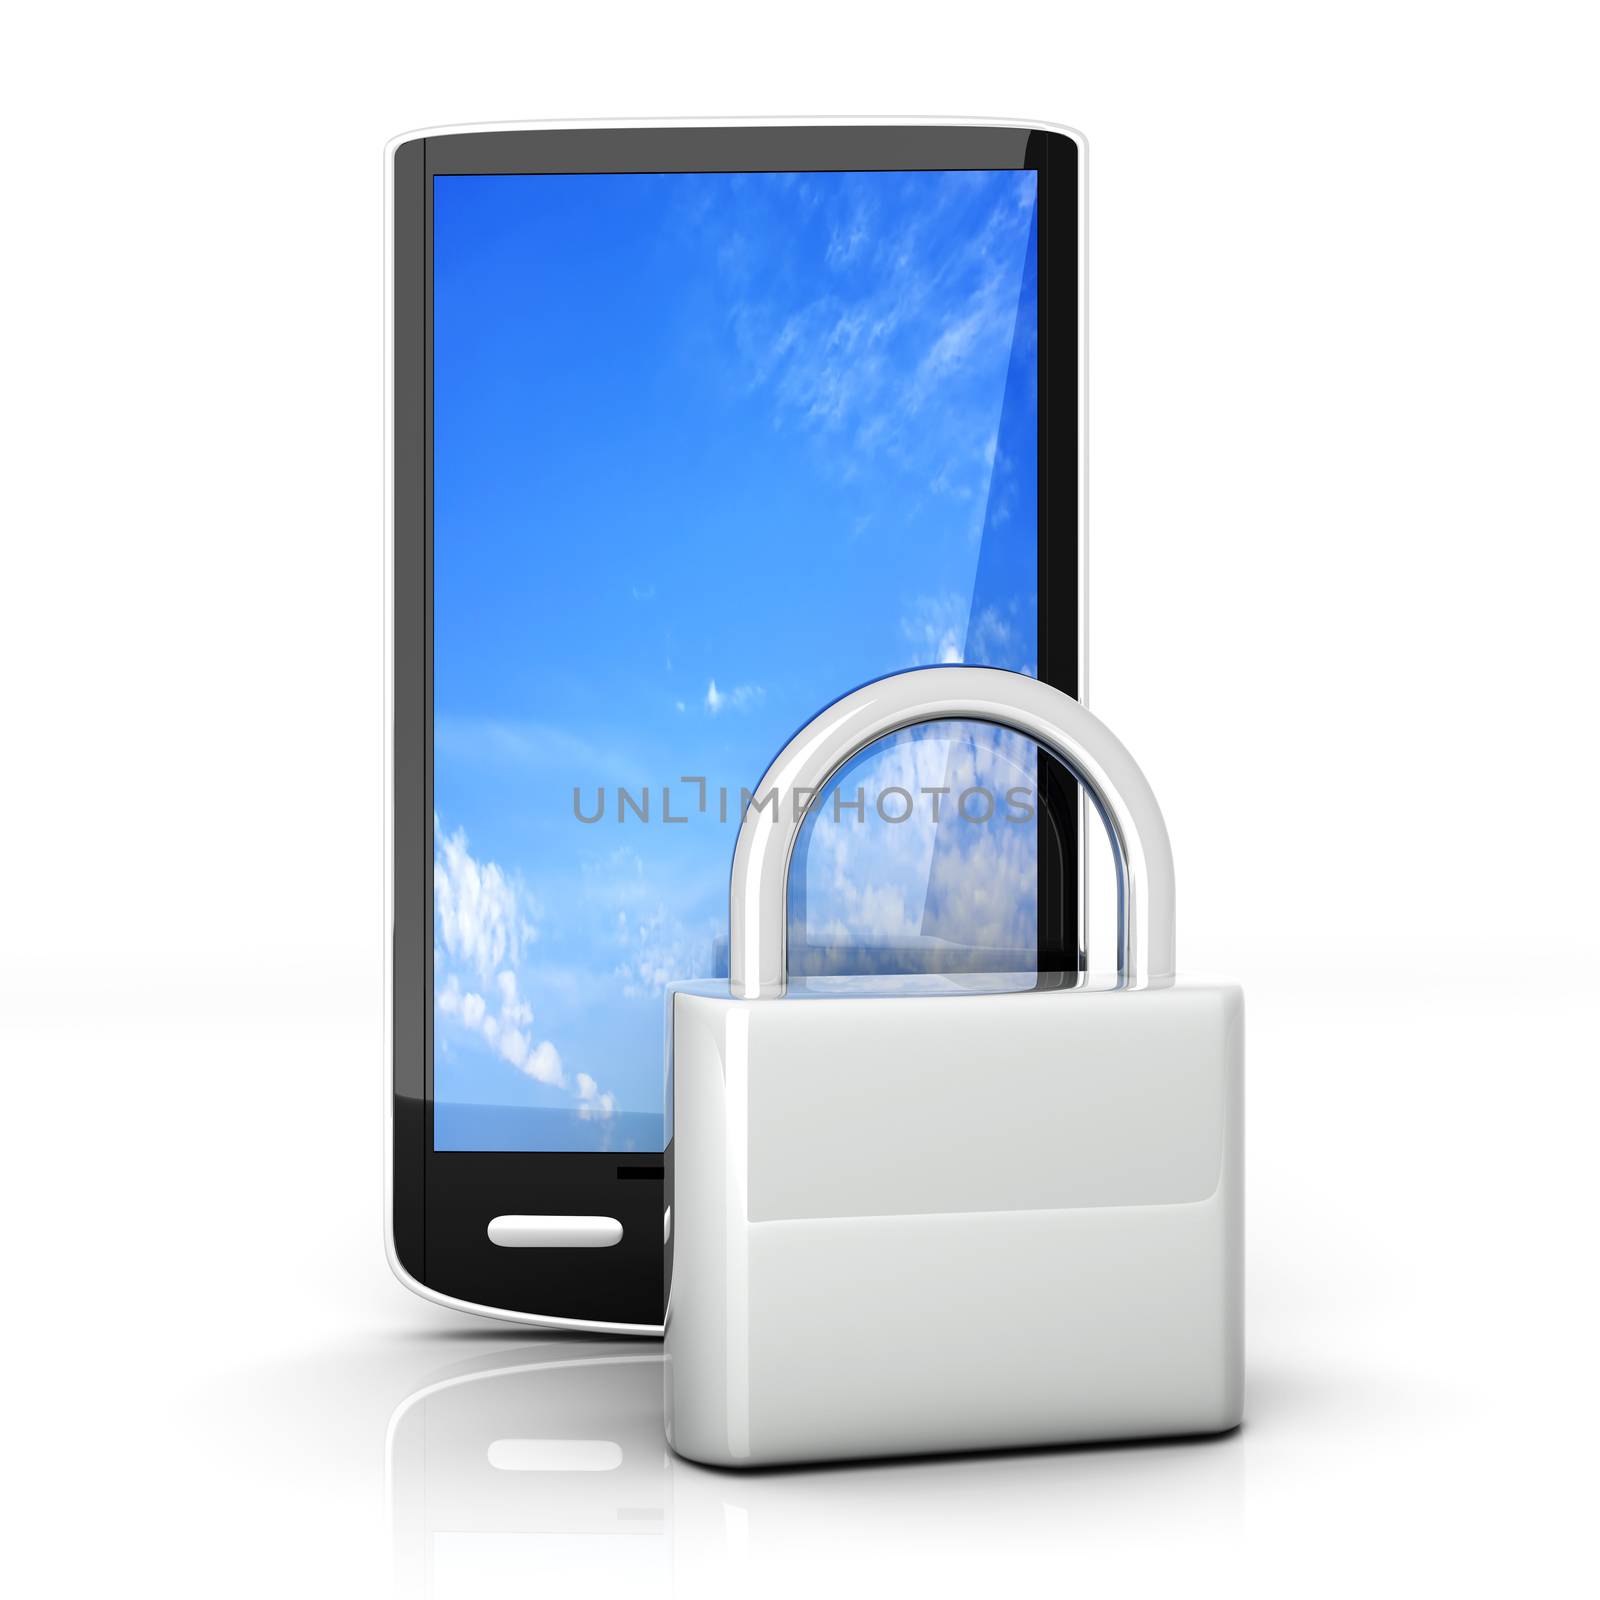 A locked smartphone. 3D rendered illustration isolated on white.